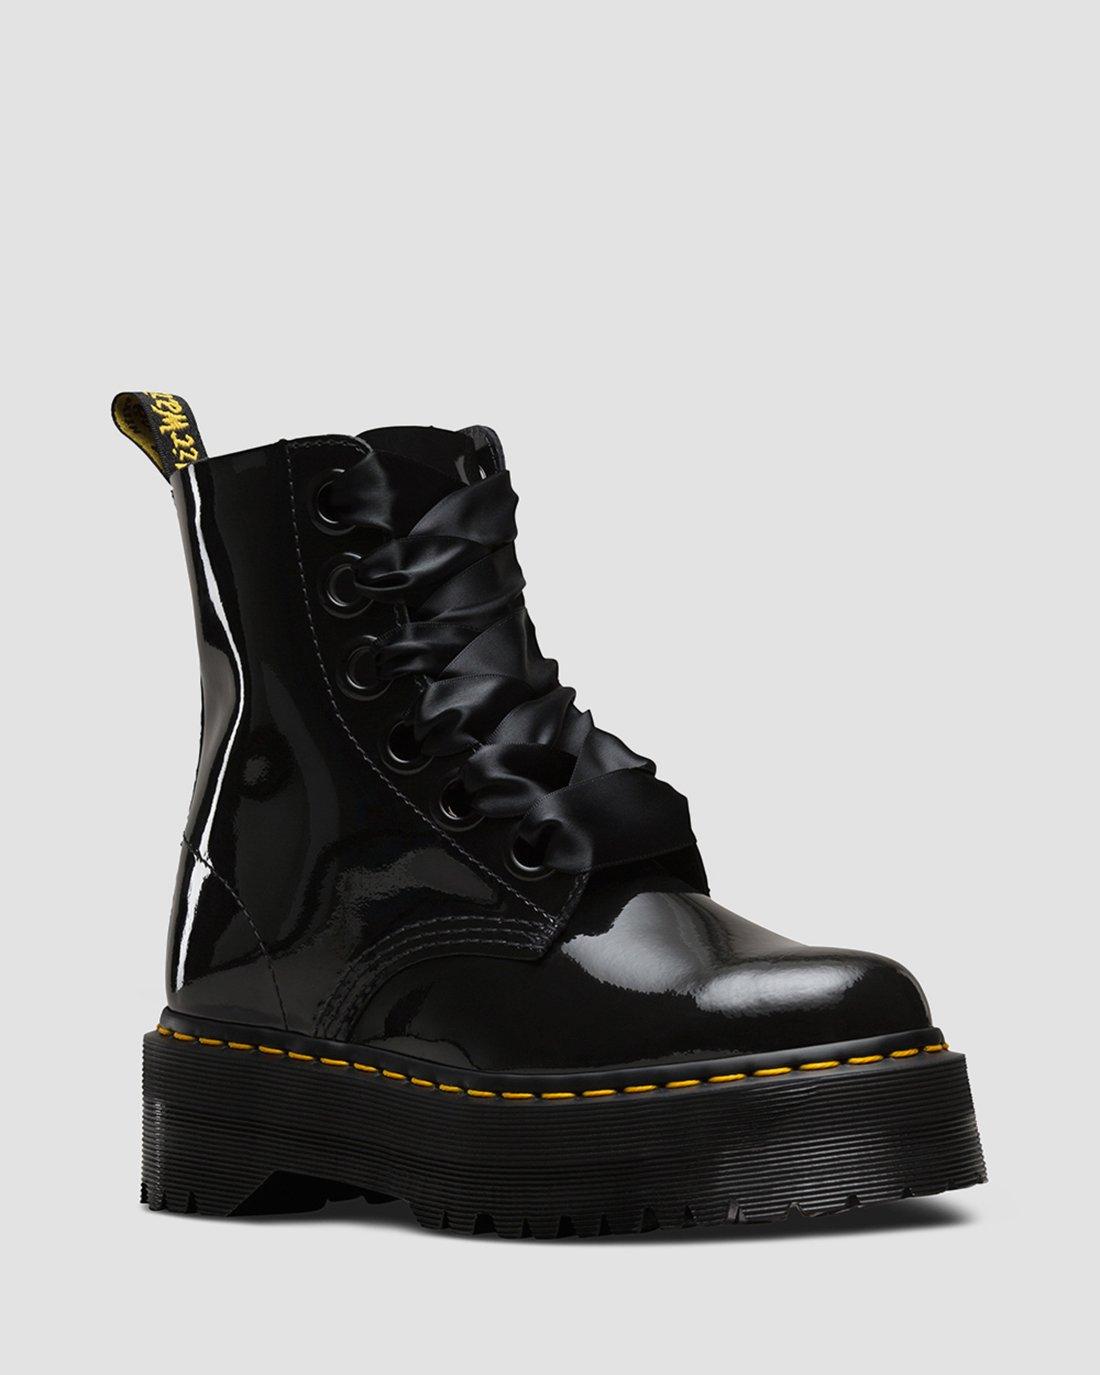 MOLLY PATENT in Black | Dr. Martens